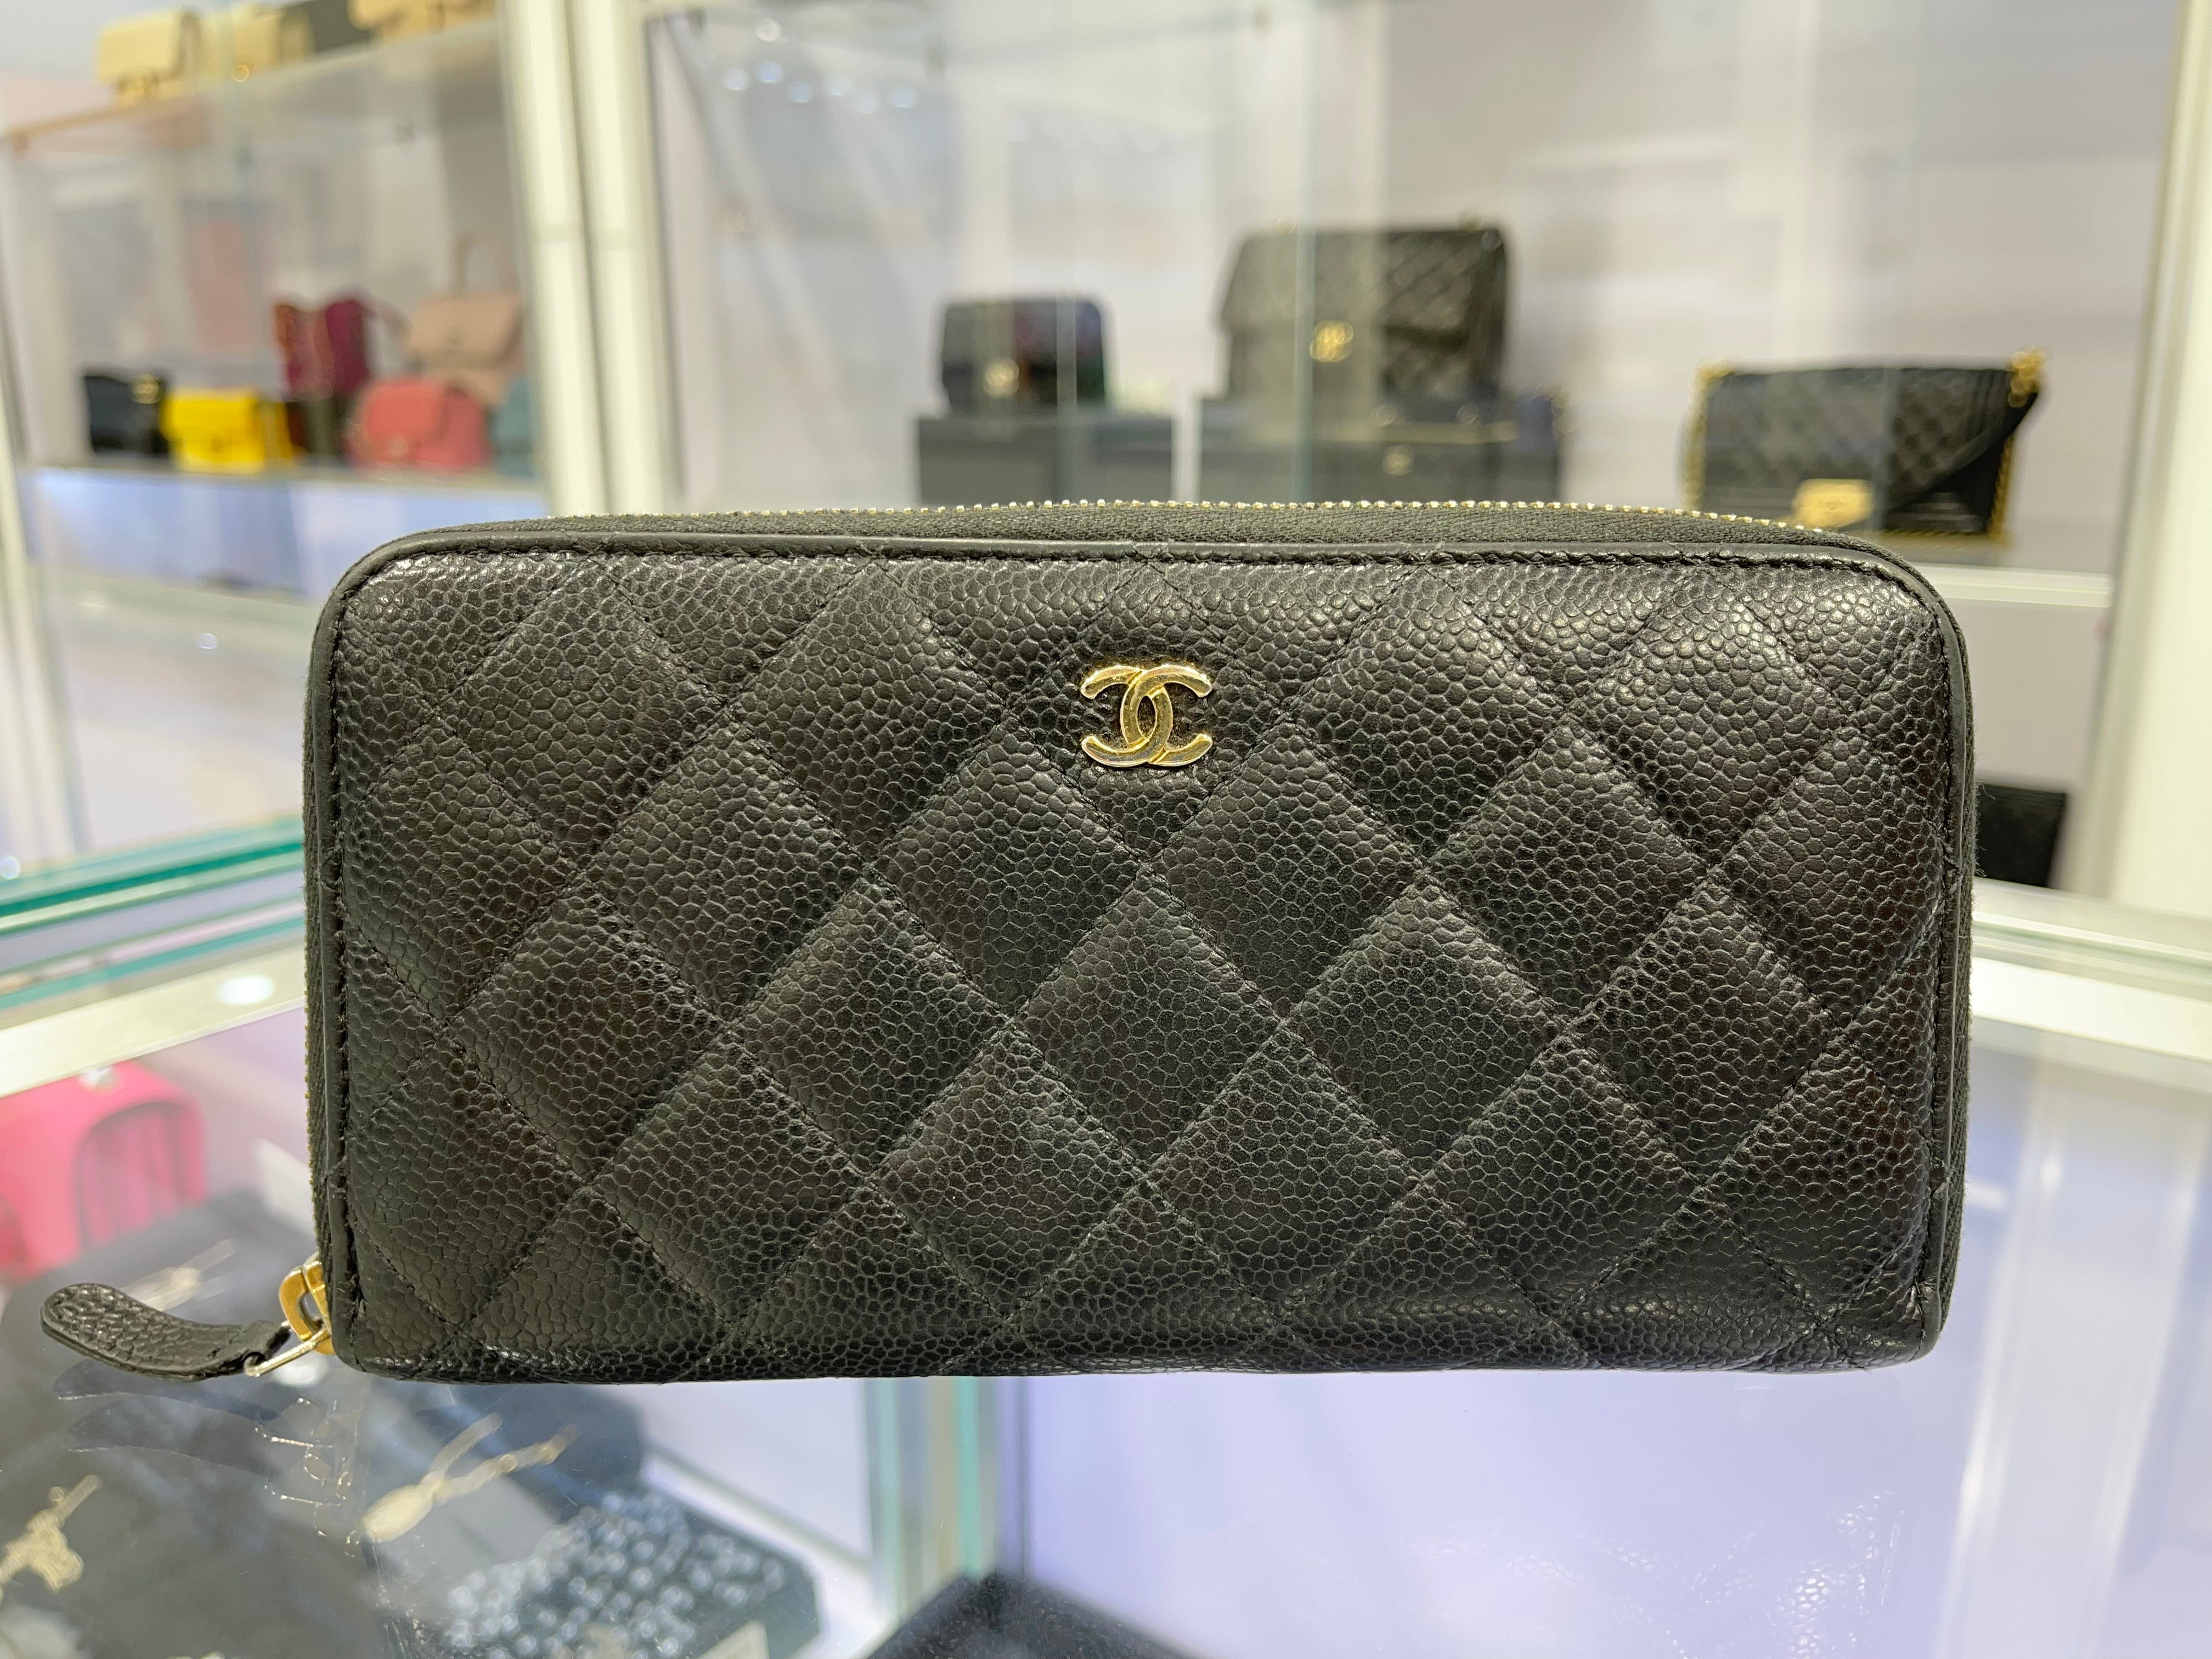 Chanel Long Zippy Caviar Leather Wallet in Black Color